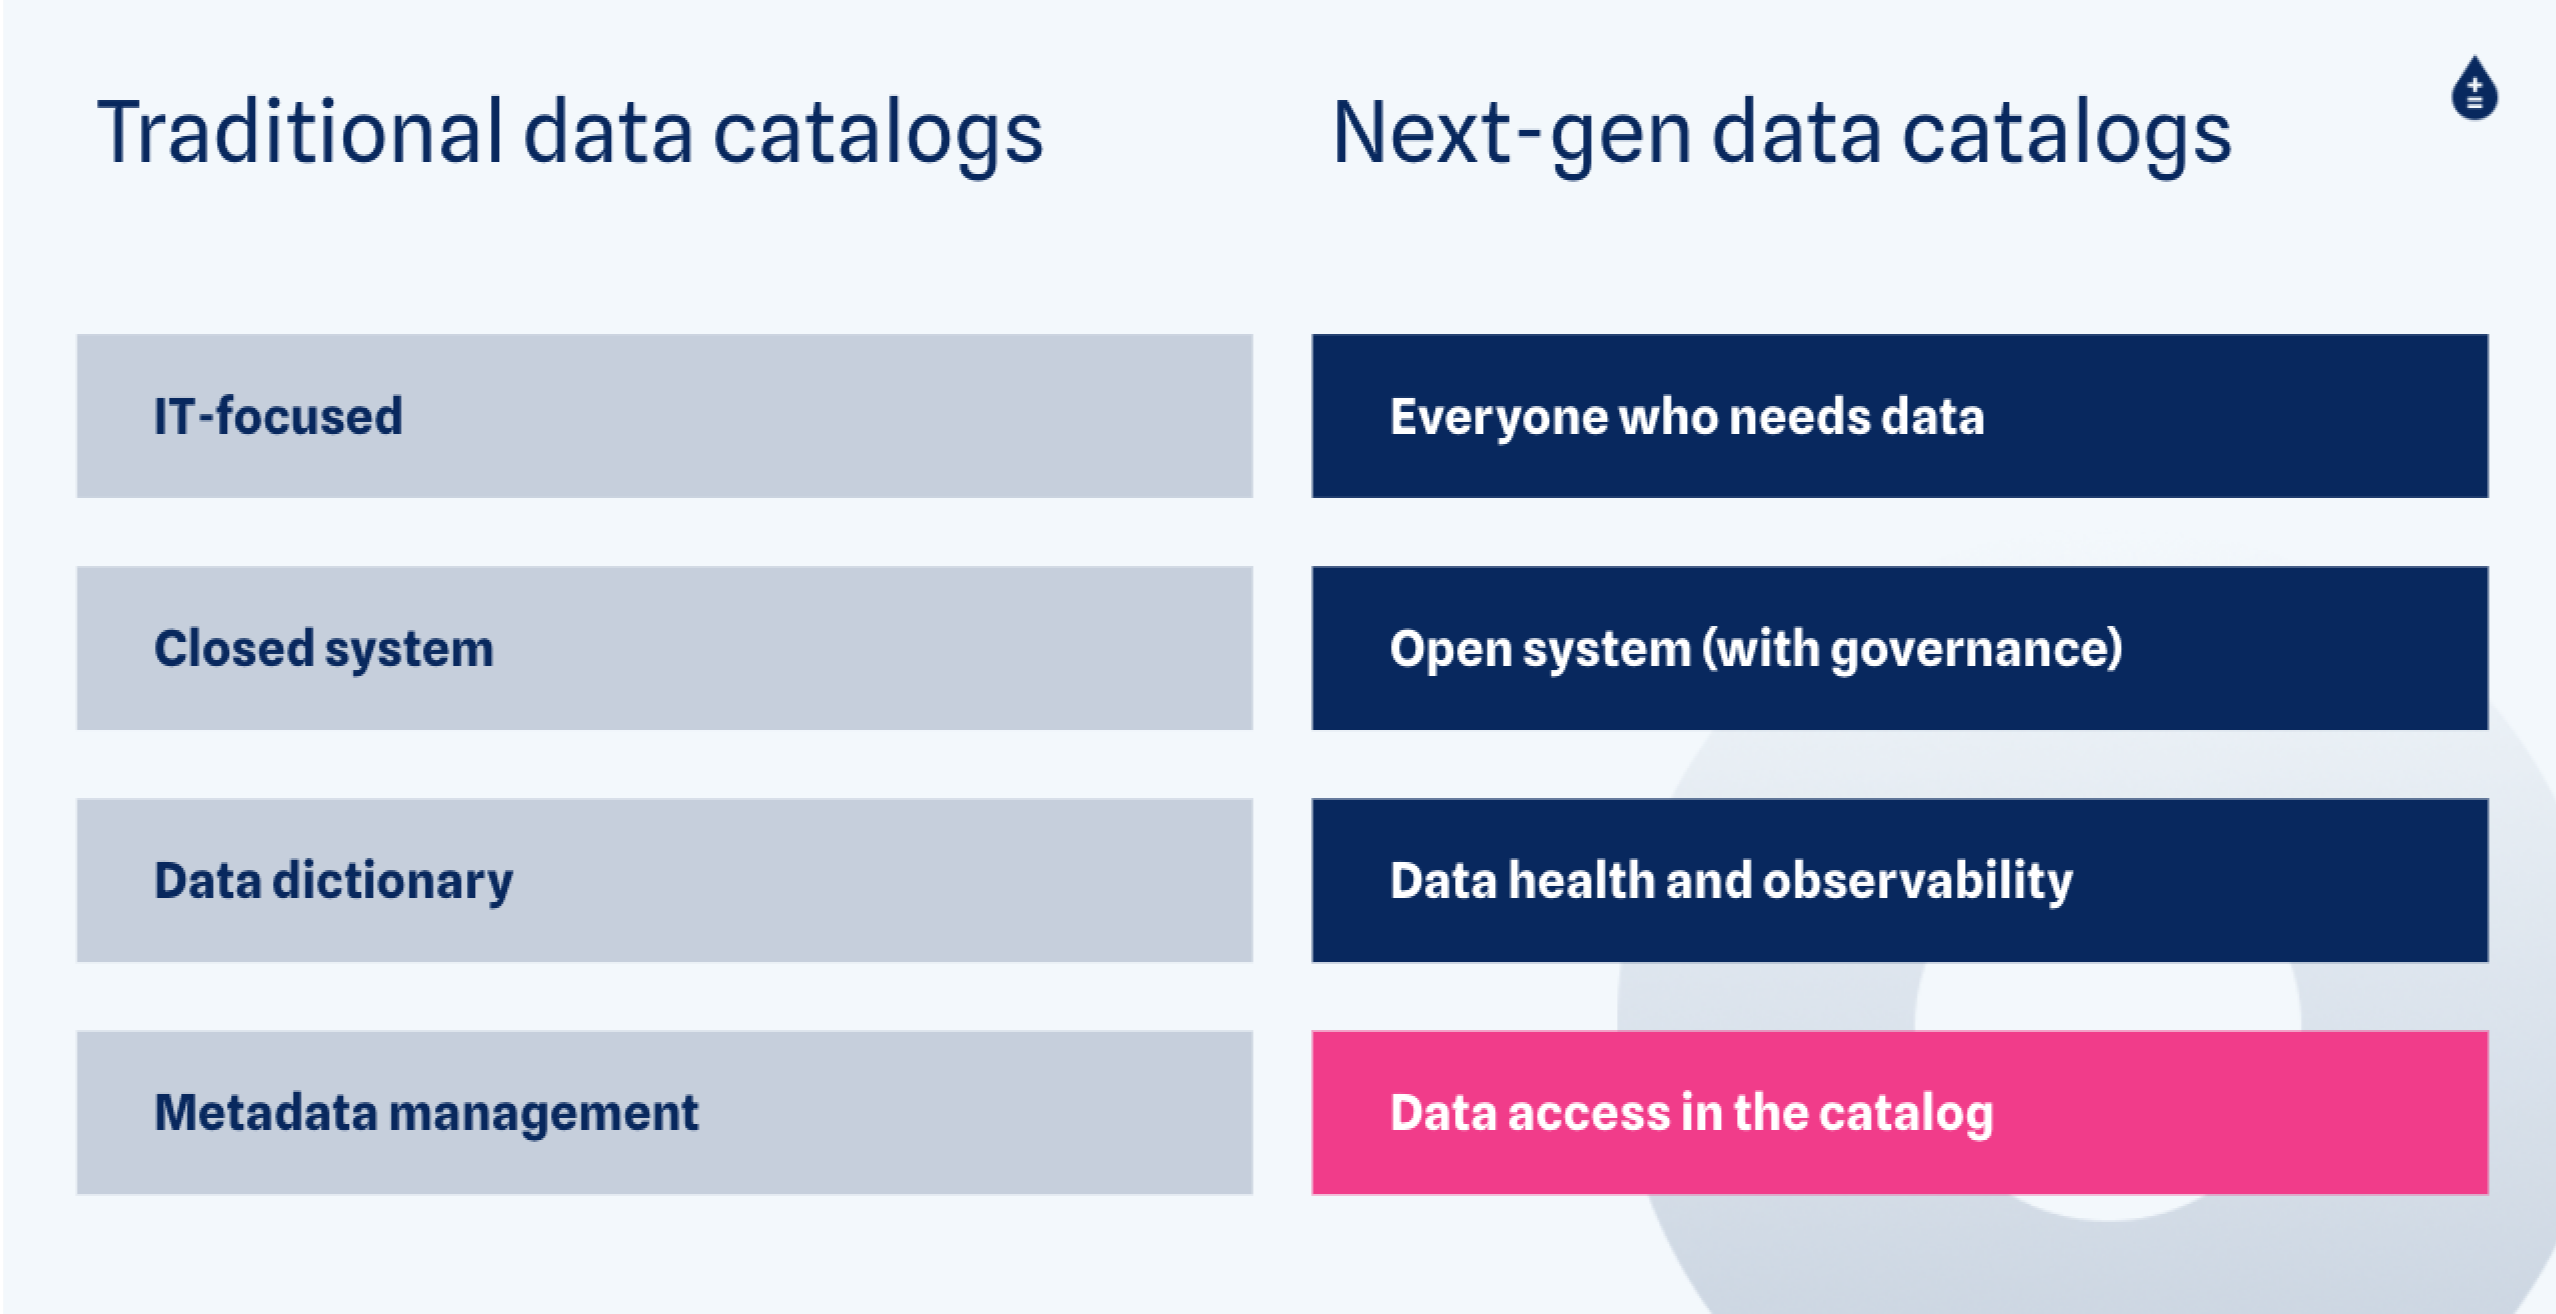 4 comparisons between old and new data catalogs. Summary: data access, governance, and observability is improved